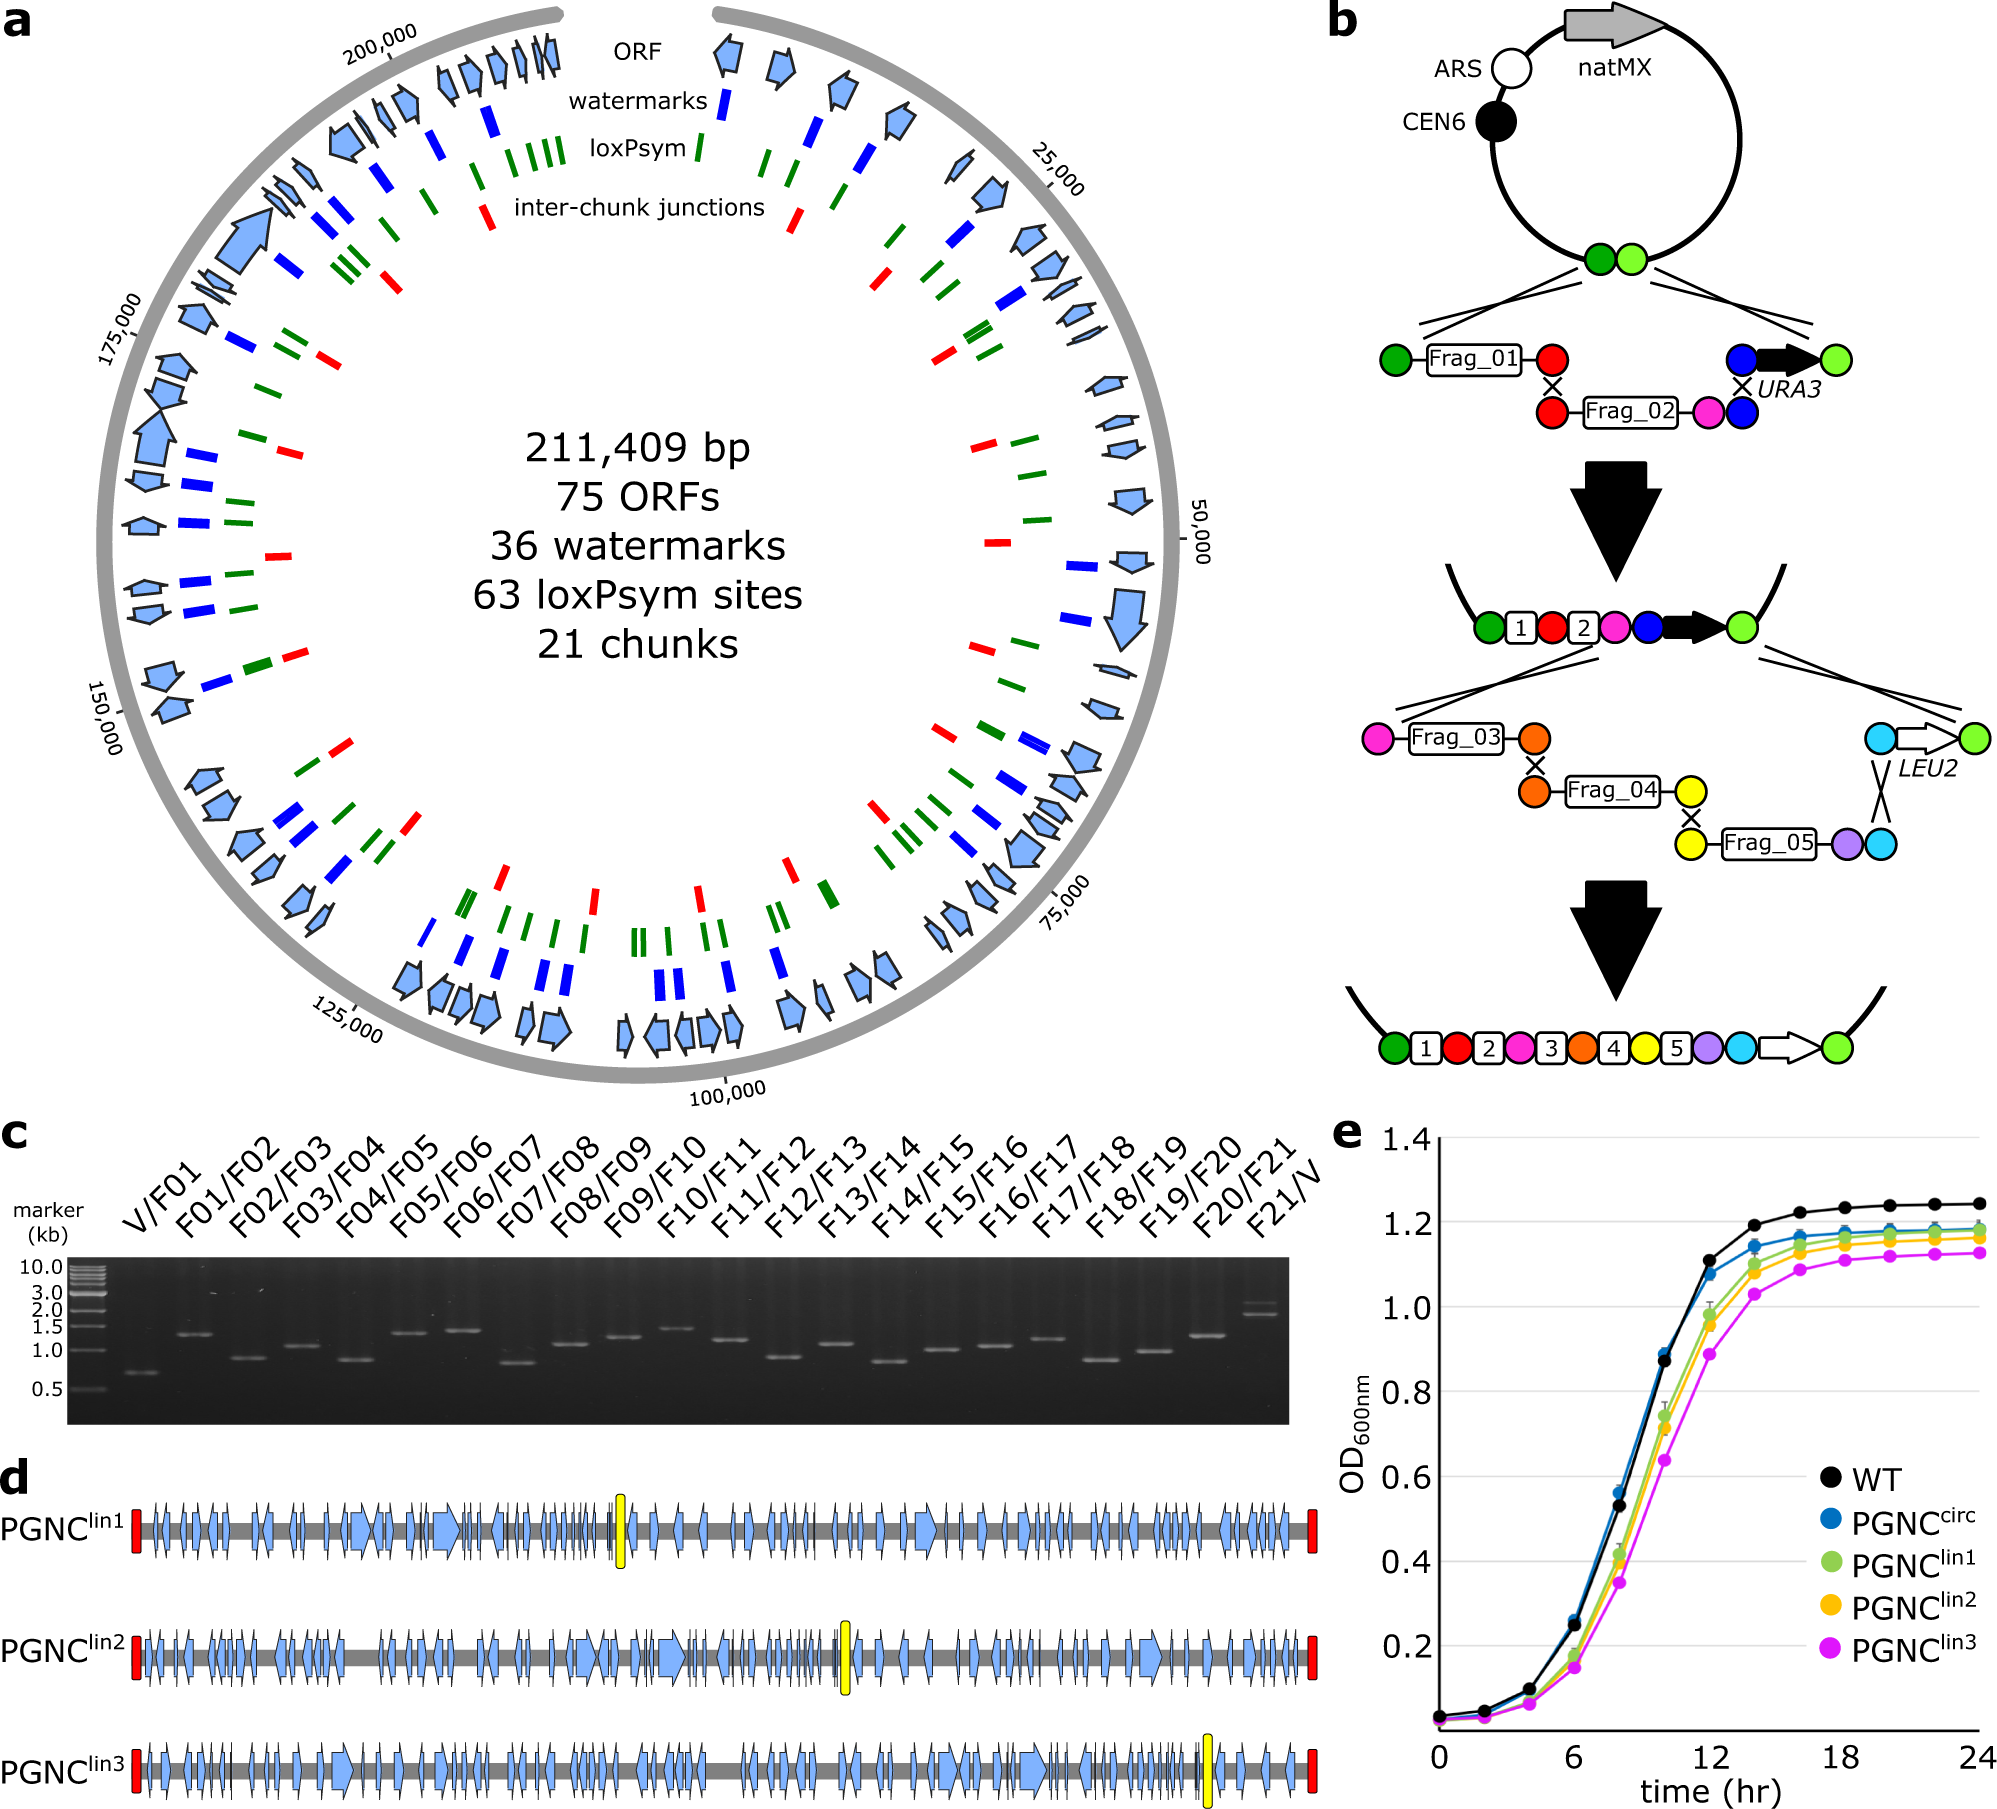 Construction of a synthetic Saccharomyces cerevisiae pan-genome  neo-chromosome | Nature Communications